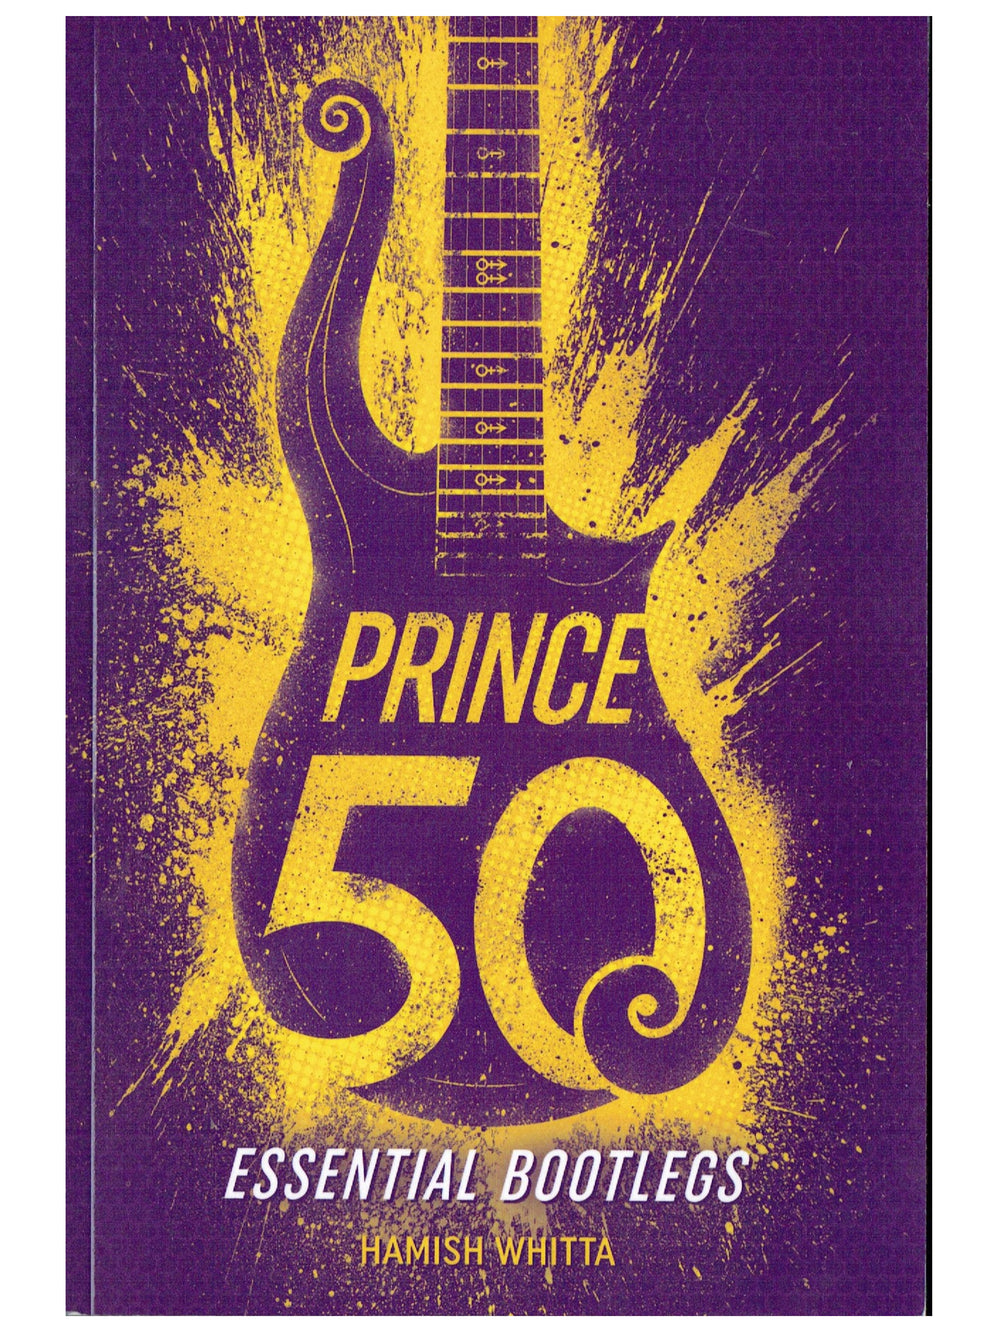 Prince – 50 Essential Softback Book Hamish Whitta MINT AS NEW